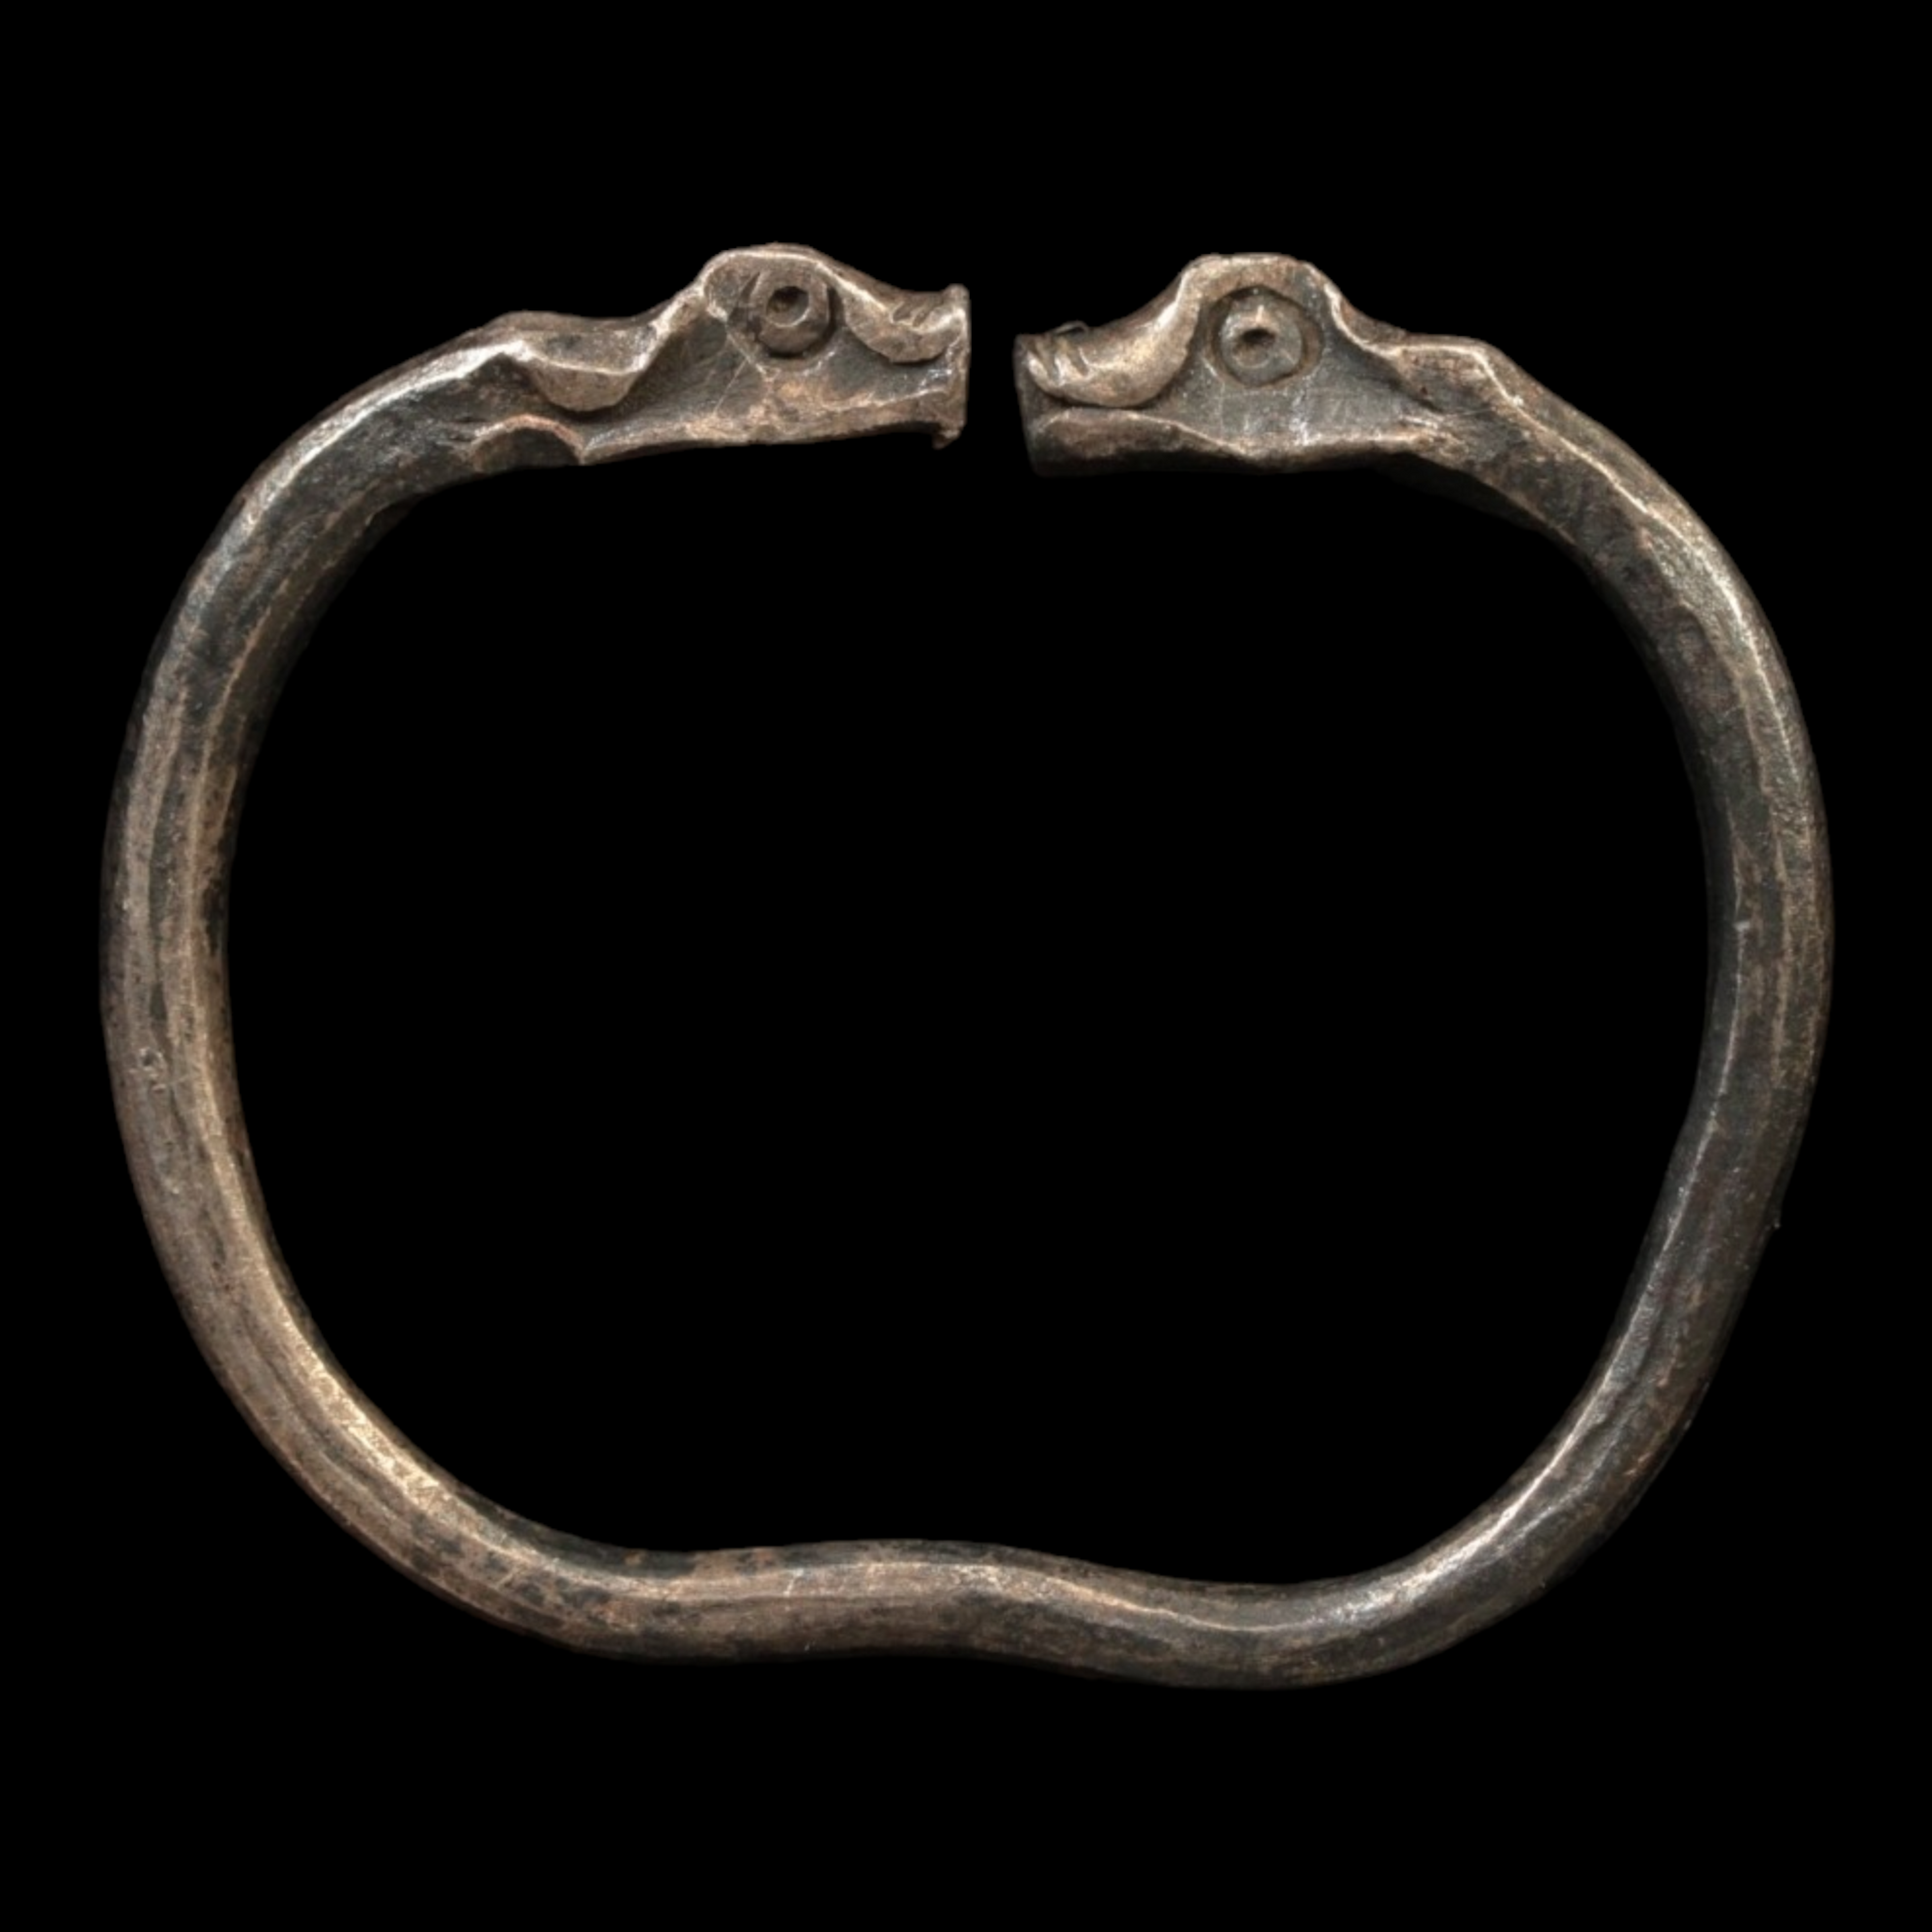 Achaemenid Empire, Goat Headed Silver Bracelet, Child Sized (49mm, 15.51g) - c. 530 to 350 BCE - Ancient Persia